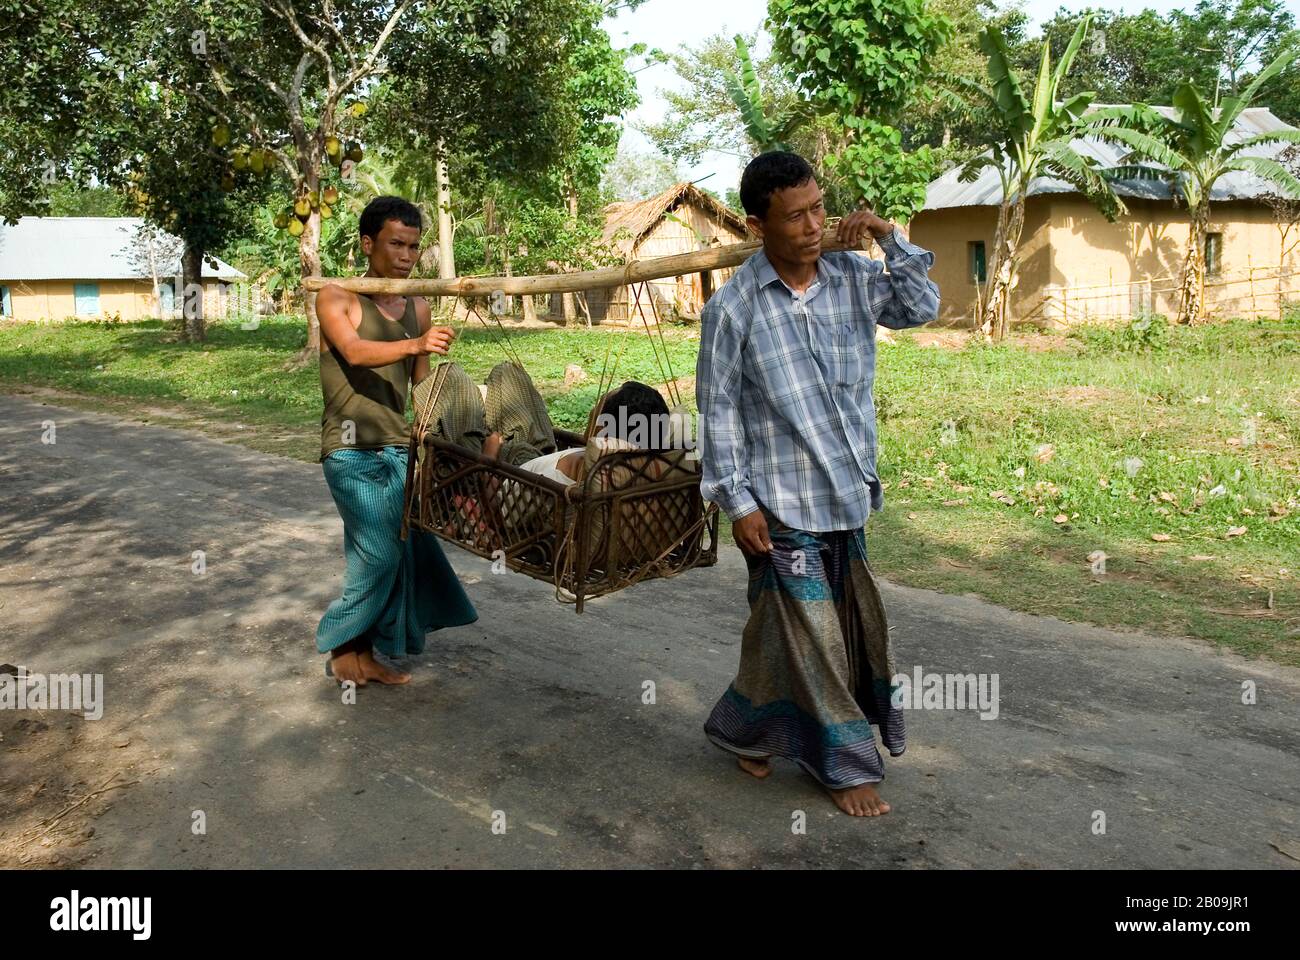 Men from the Chakma community carry a patient on a traditional cane basket to the doctor. Matiranga, Khagrachari, Bangladesh. May 11, 2010. Stock Photo